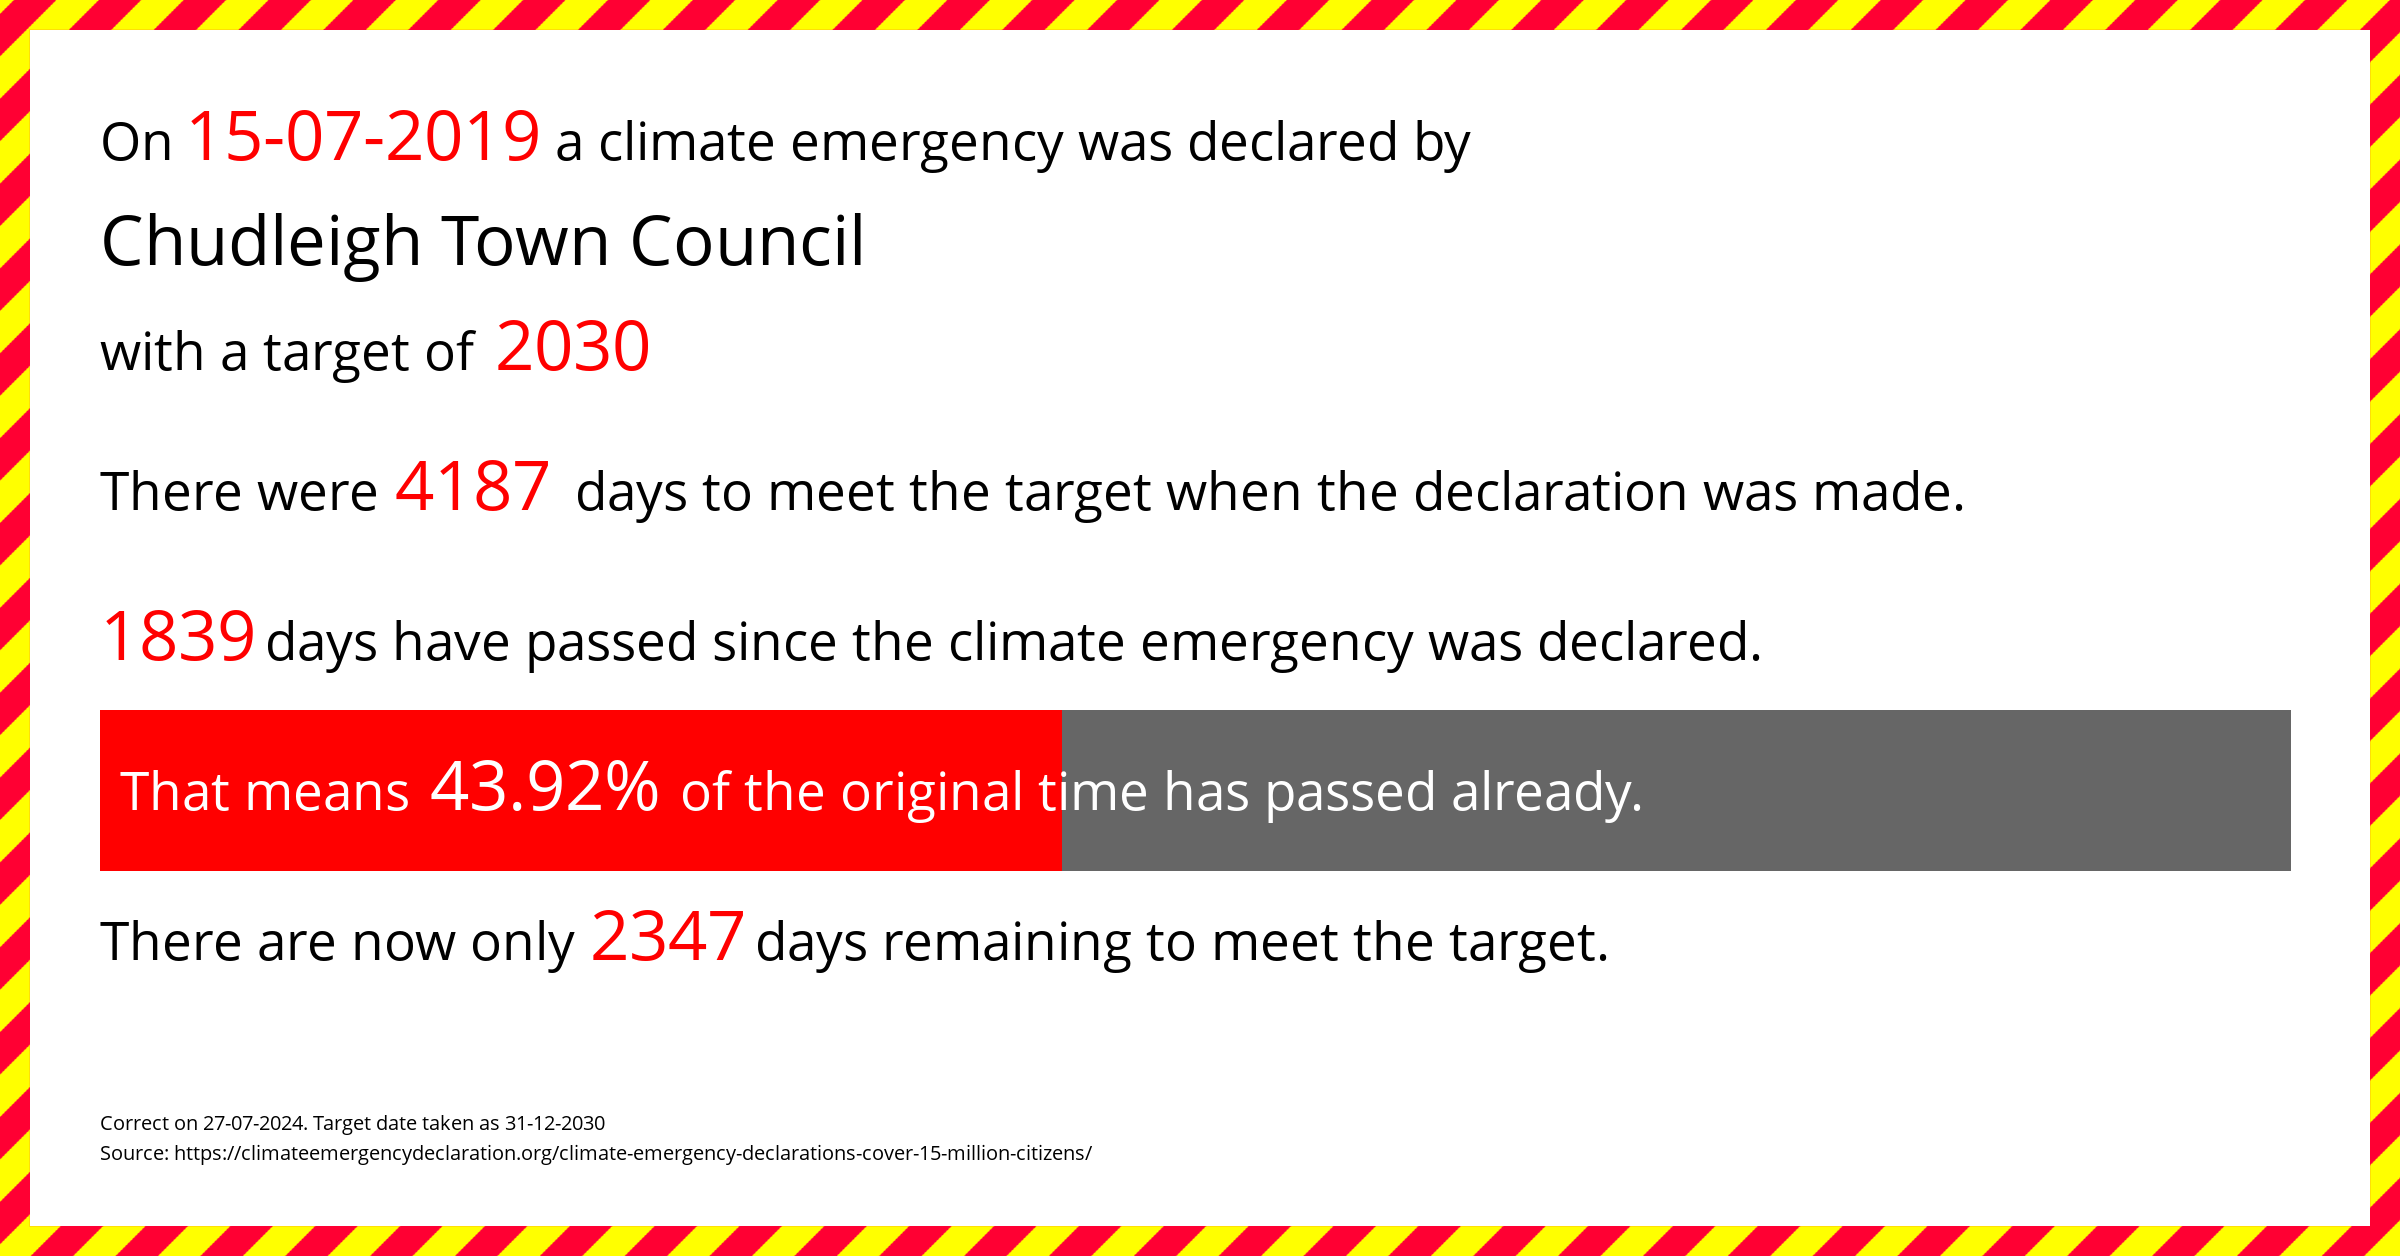 Chudleigh Town Council  declared a Climate emergency on Monday 15th July 2019, with a target of 2030.